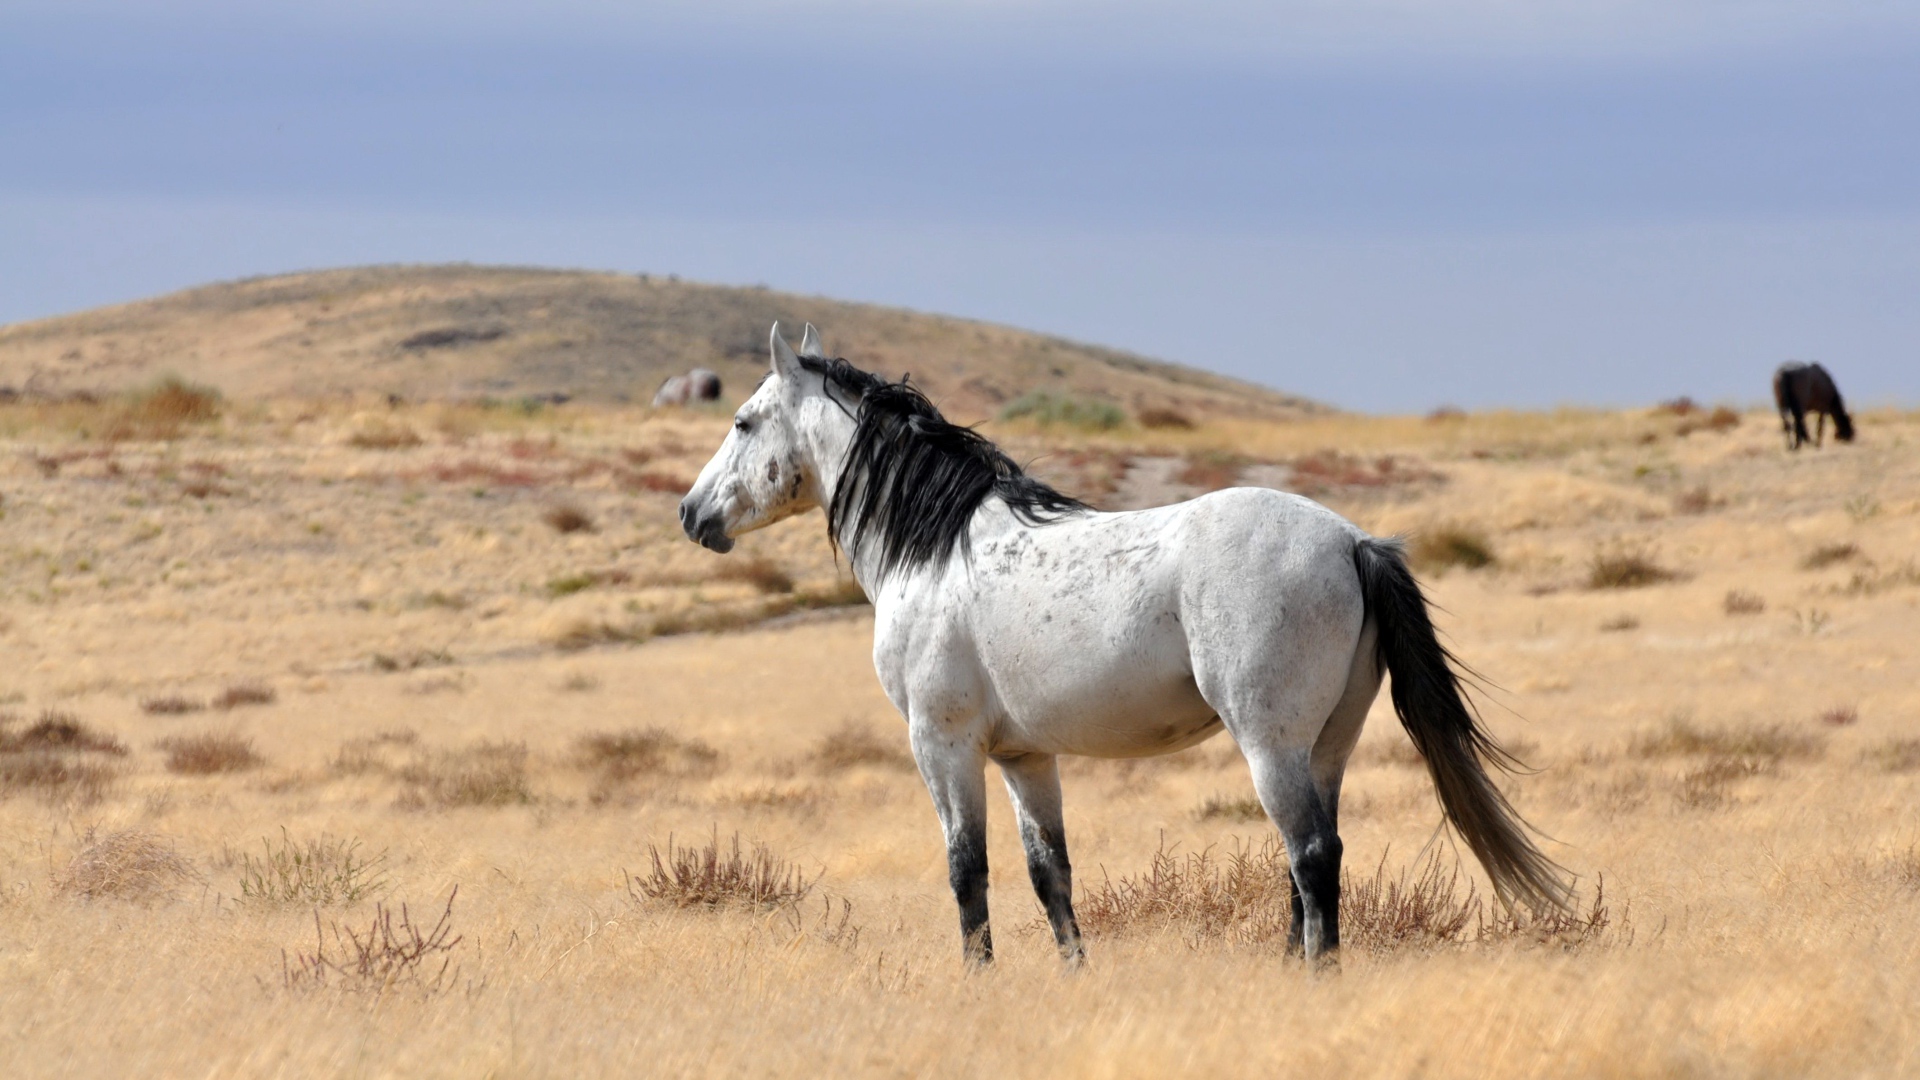 White horse with black mane grazing on dry grass